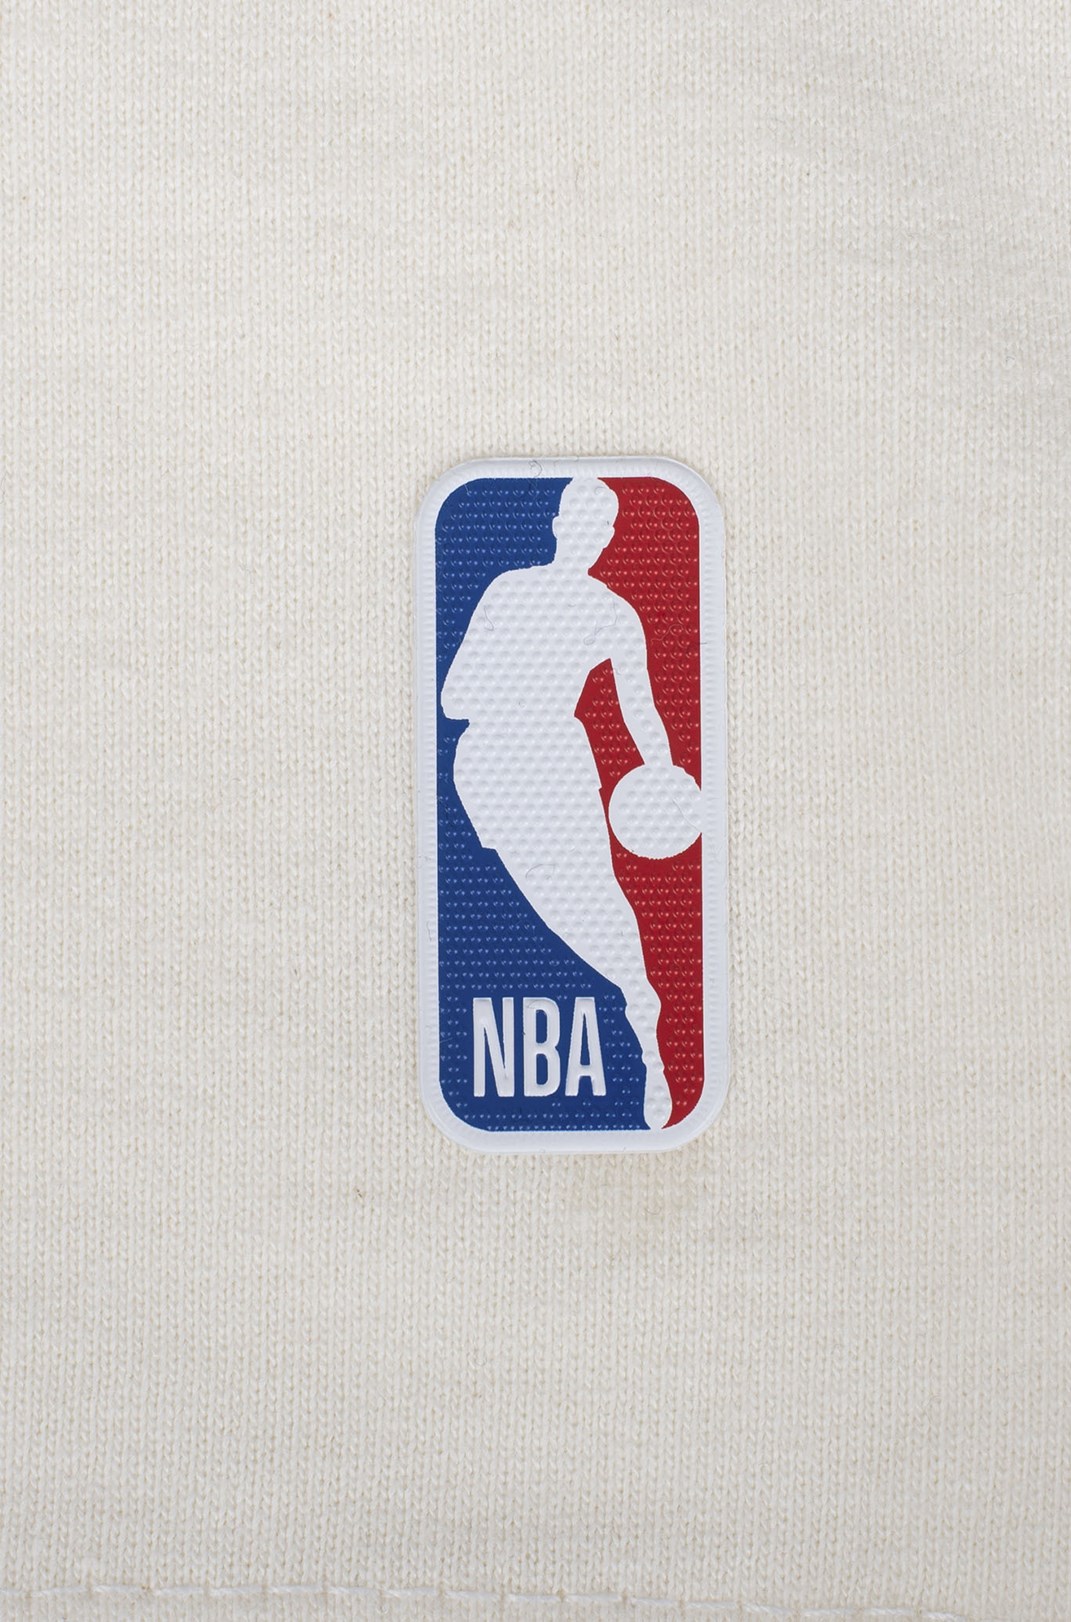 Camiseta Dystom Approve X Nba Lakers Off White